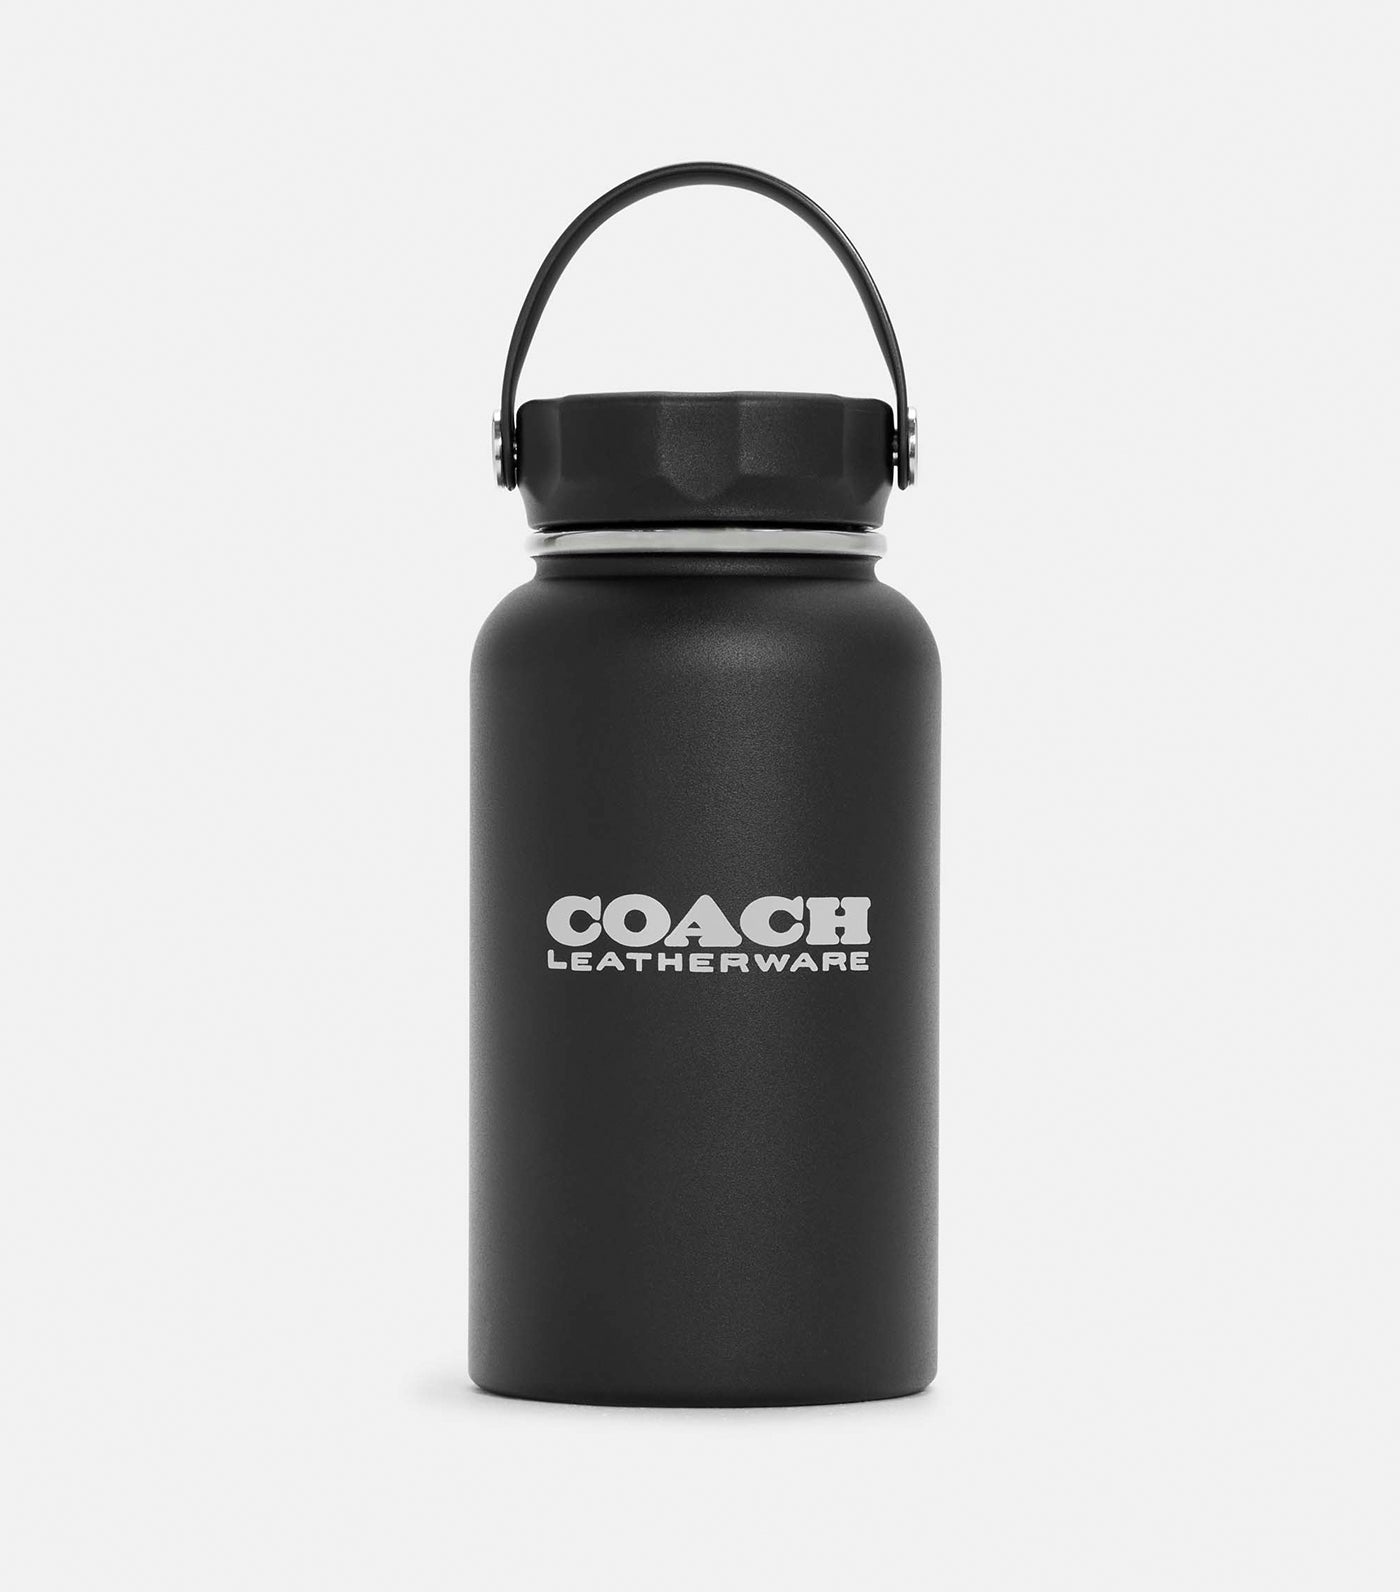 Complimentary Coach Water Bottle Black